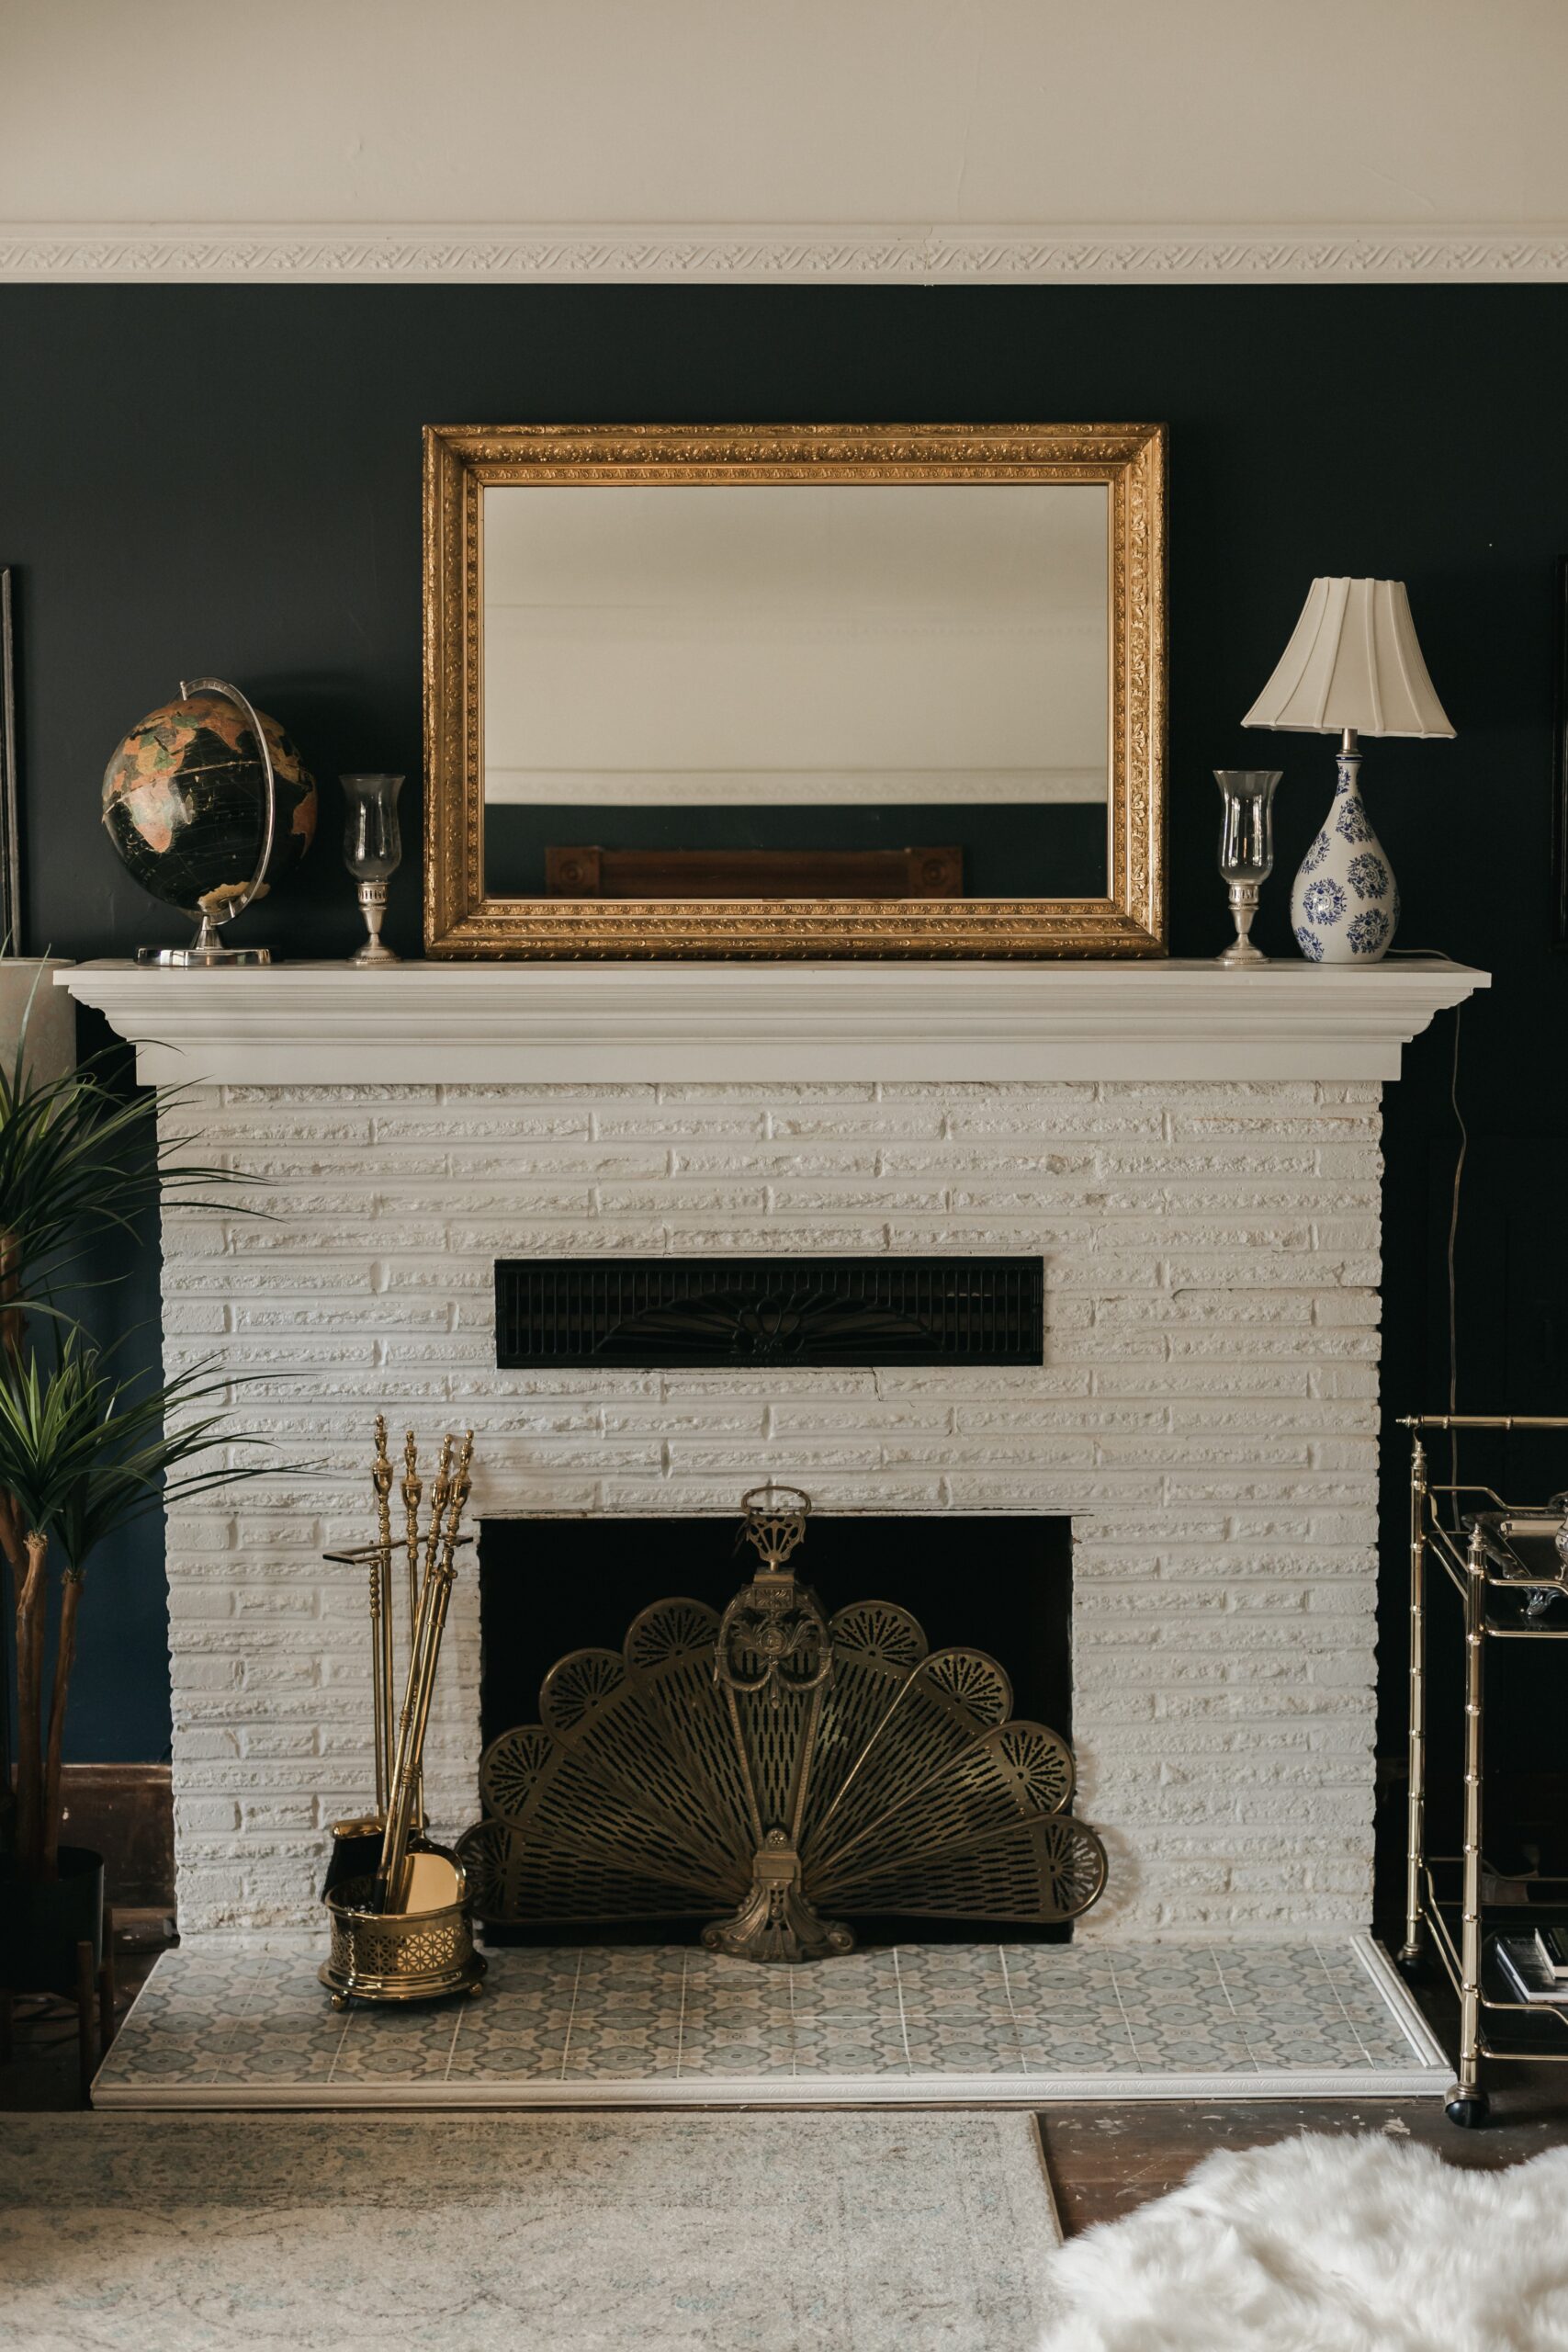 Tips on painting a brick fireplace